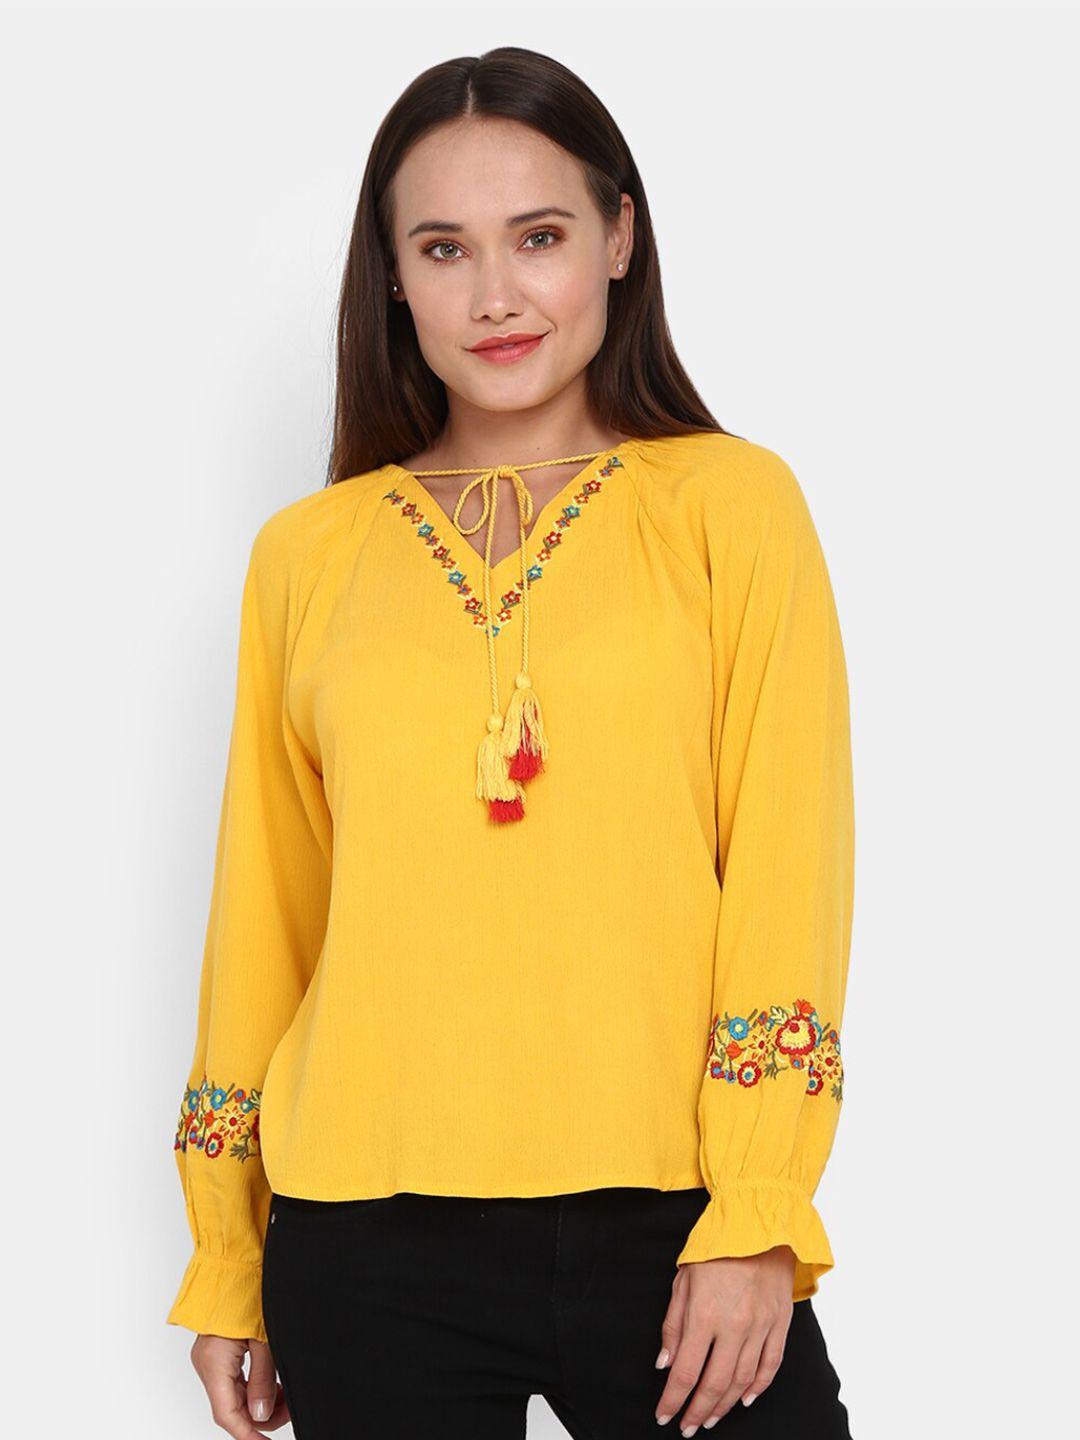 v-mart women western self design mustard yellow embroidered tie-up neck top